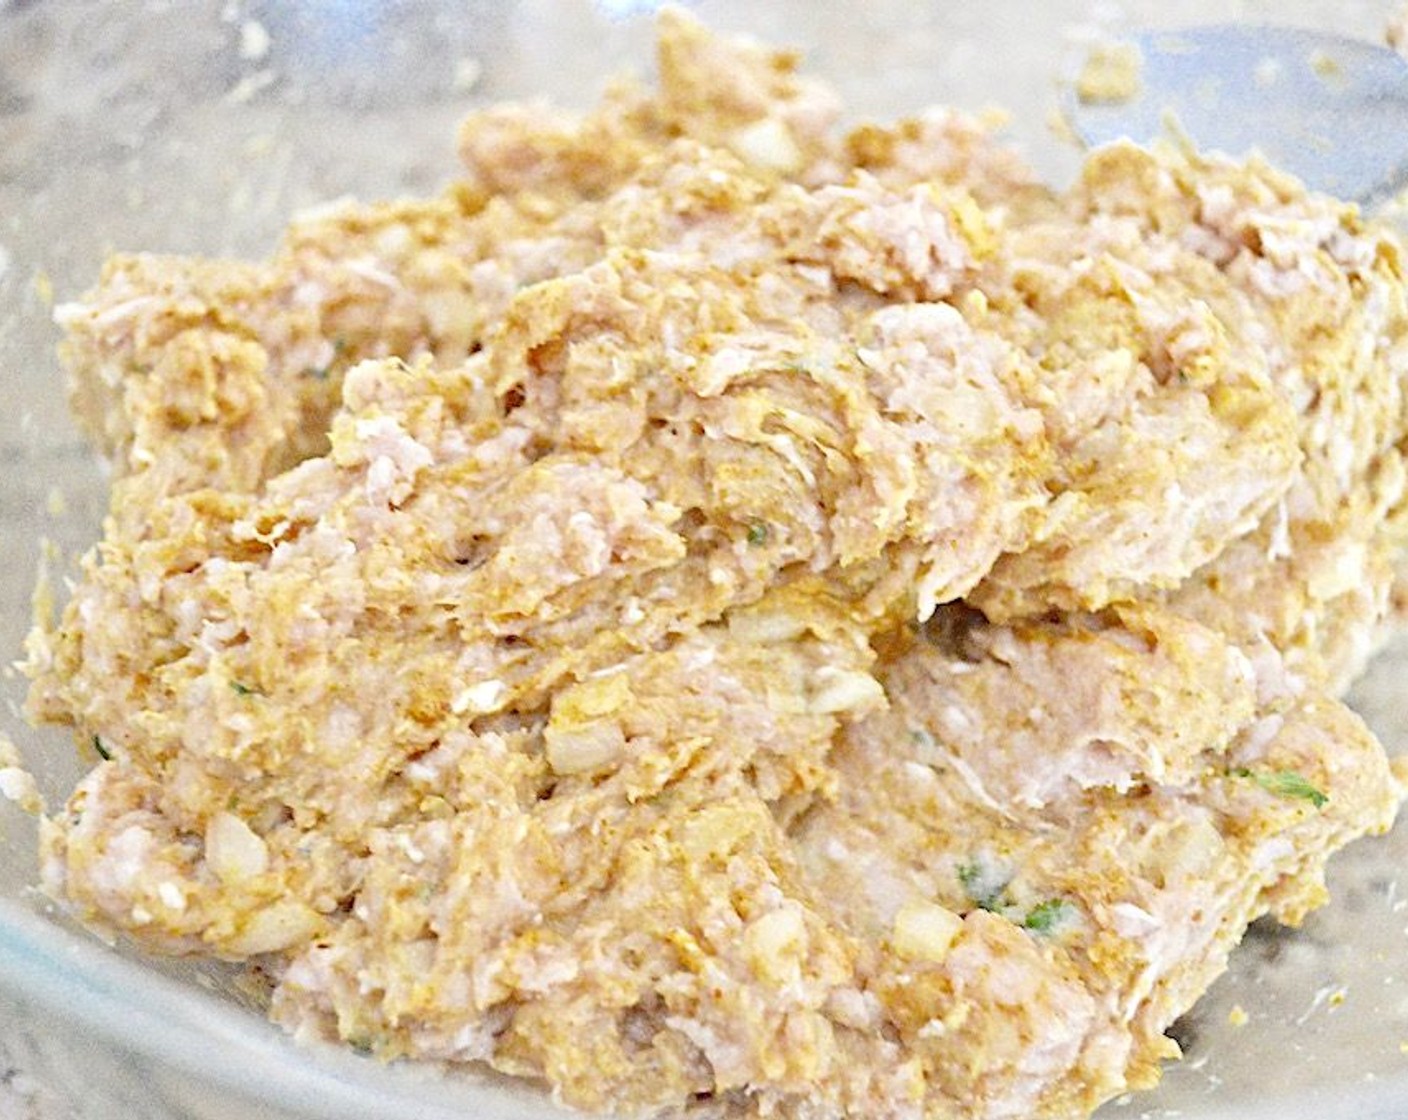 step 2 Combine the Ground Chicken (2 lb), Breadcrumbs (1/2 cup), {@10:}, Curry Powder (2 Tbsp), 1 tablespoon of the Plain Greek Yogurt (1/2 cup), Dijon Mustard (1 Tbsp), Fresh Cilantro (1 Tbsp), Onion (1), McCormick® Garlic Powder (1/2 tsp), Salt (1 pinch), and Ground Black Pepper (1 pinch) in a large mixing bowl. Stir until well combined.